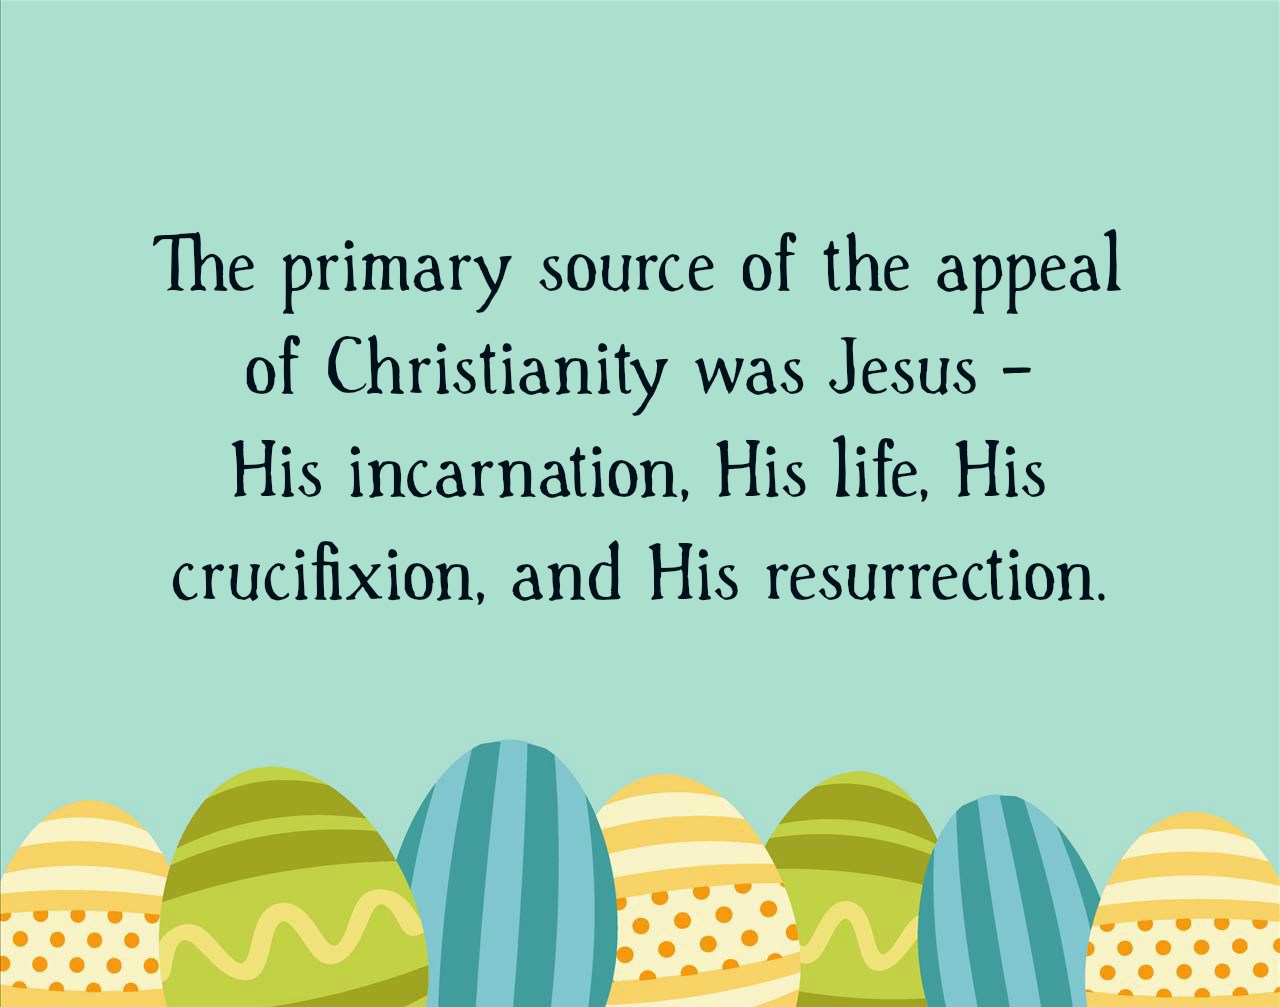 Easter Quotes